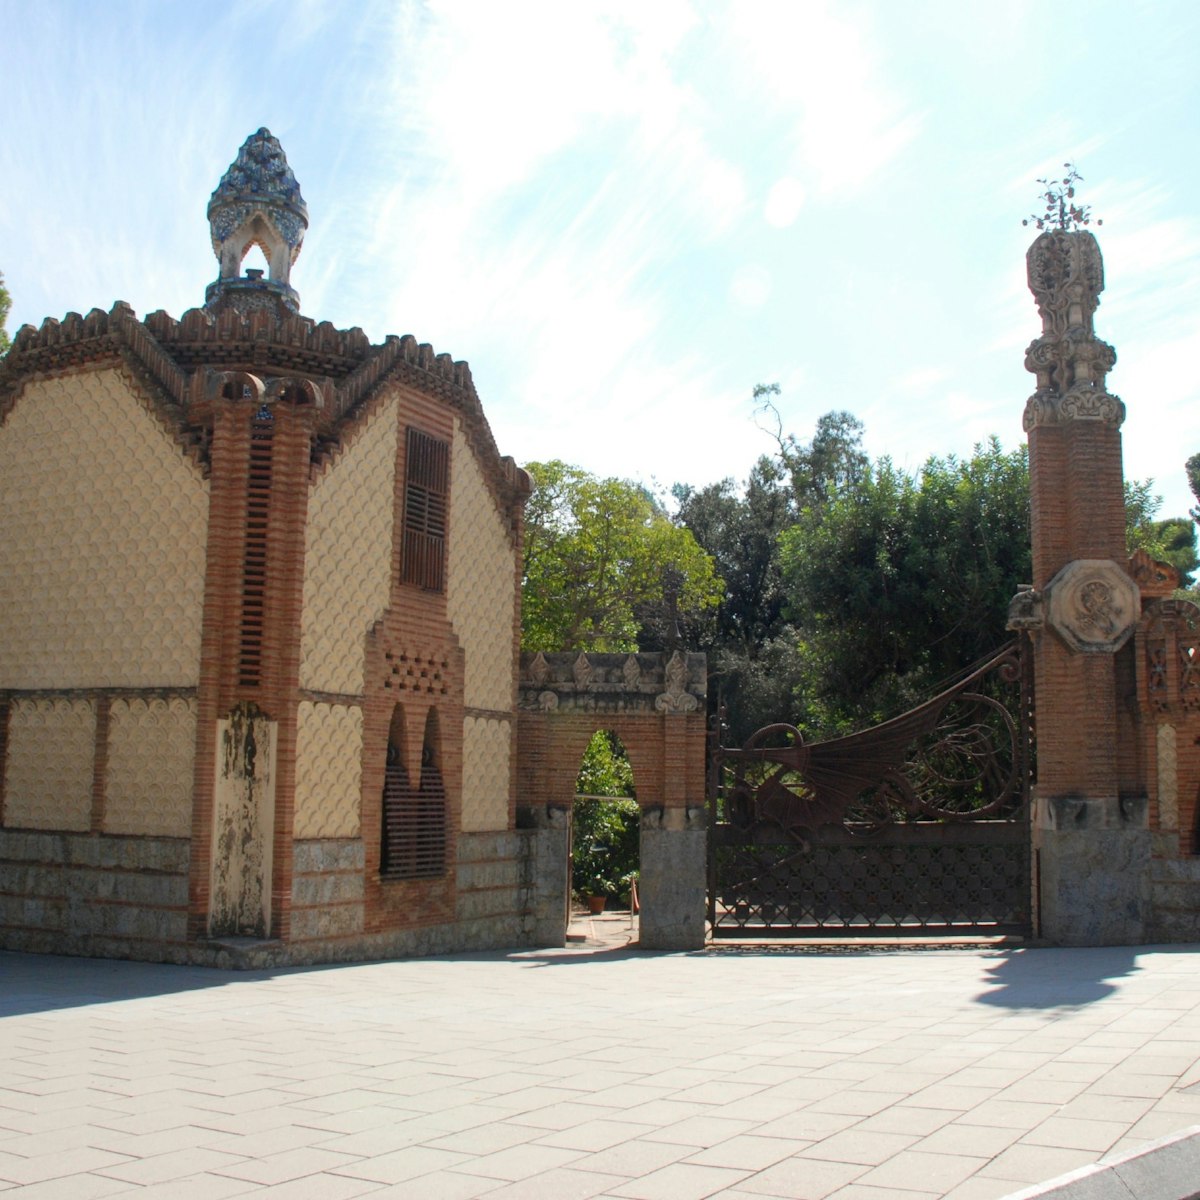 Outisde of Pavellons Güell from far